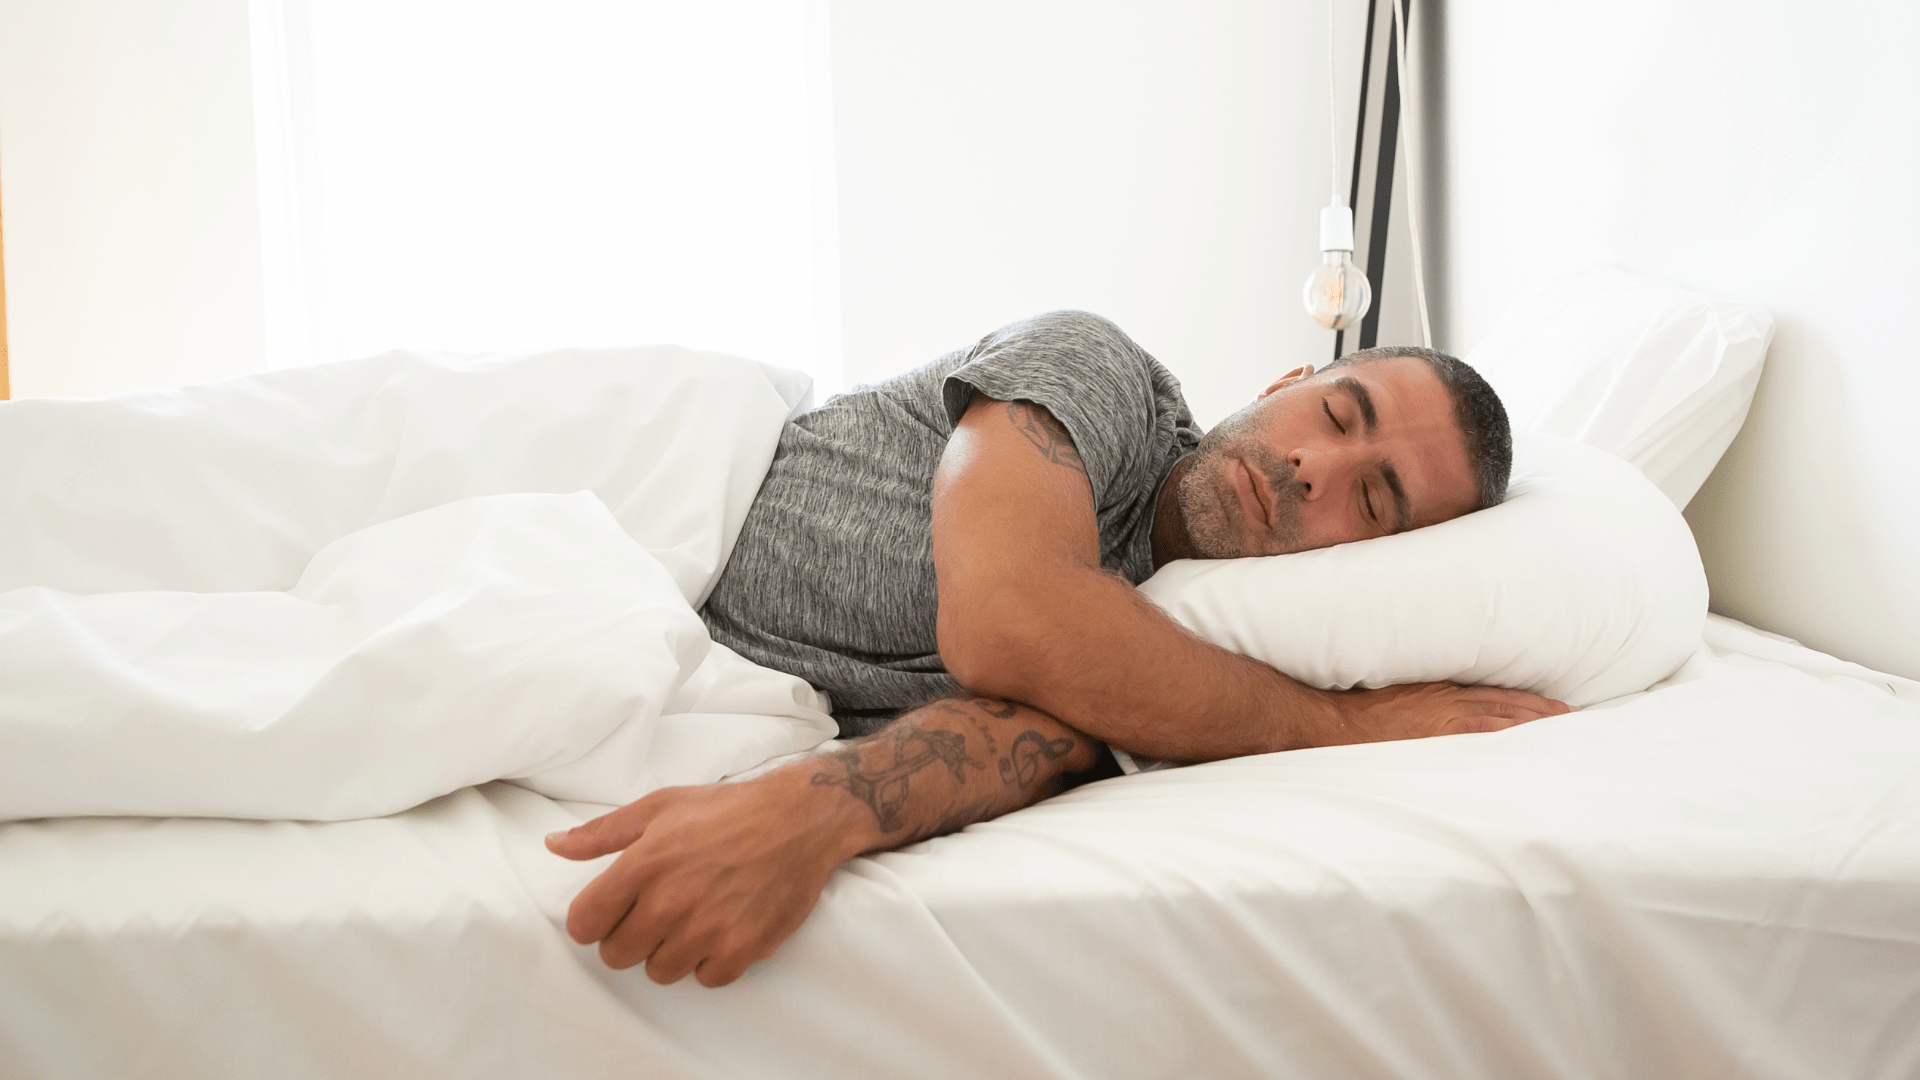 A middle aged man sleeping in bed.